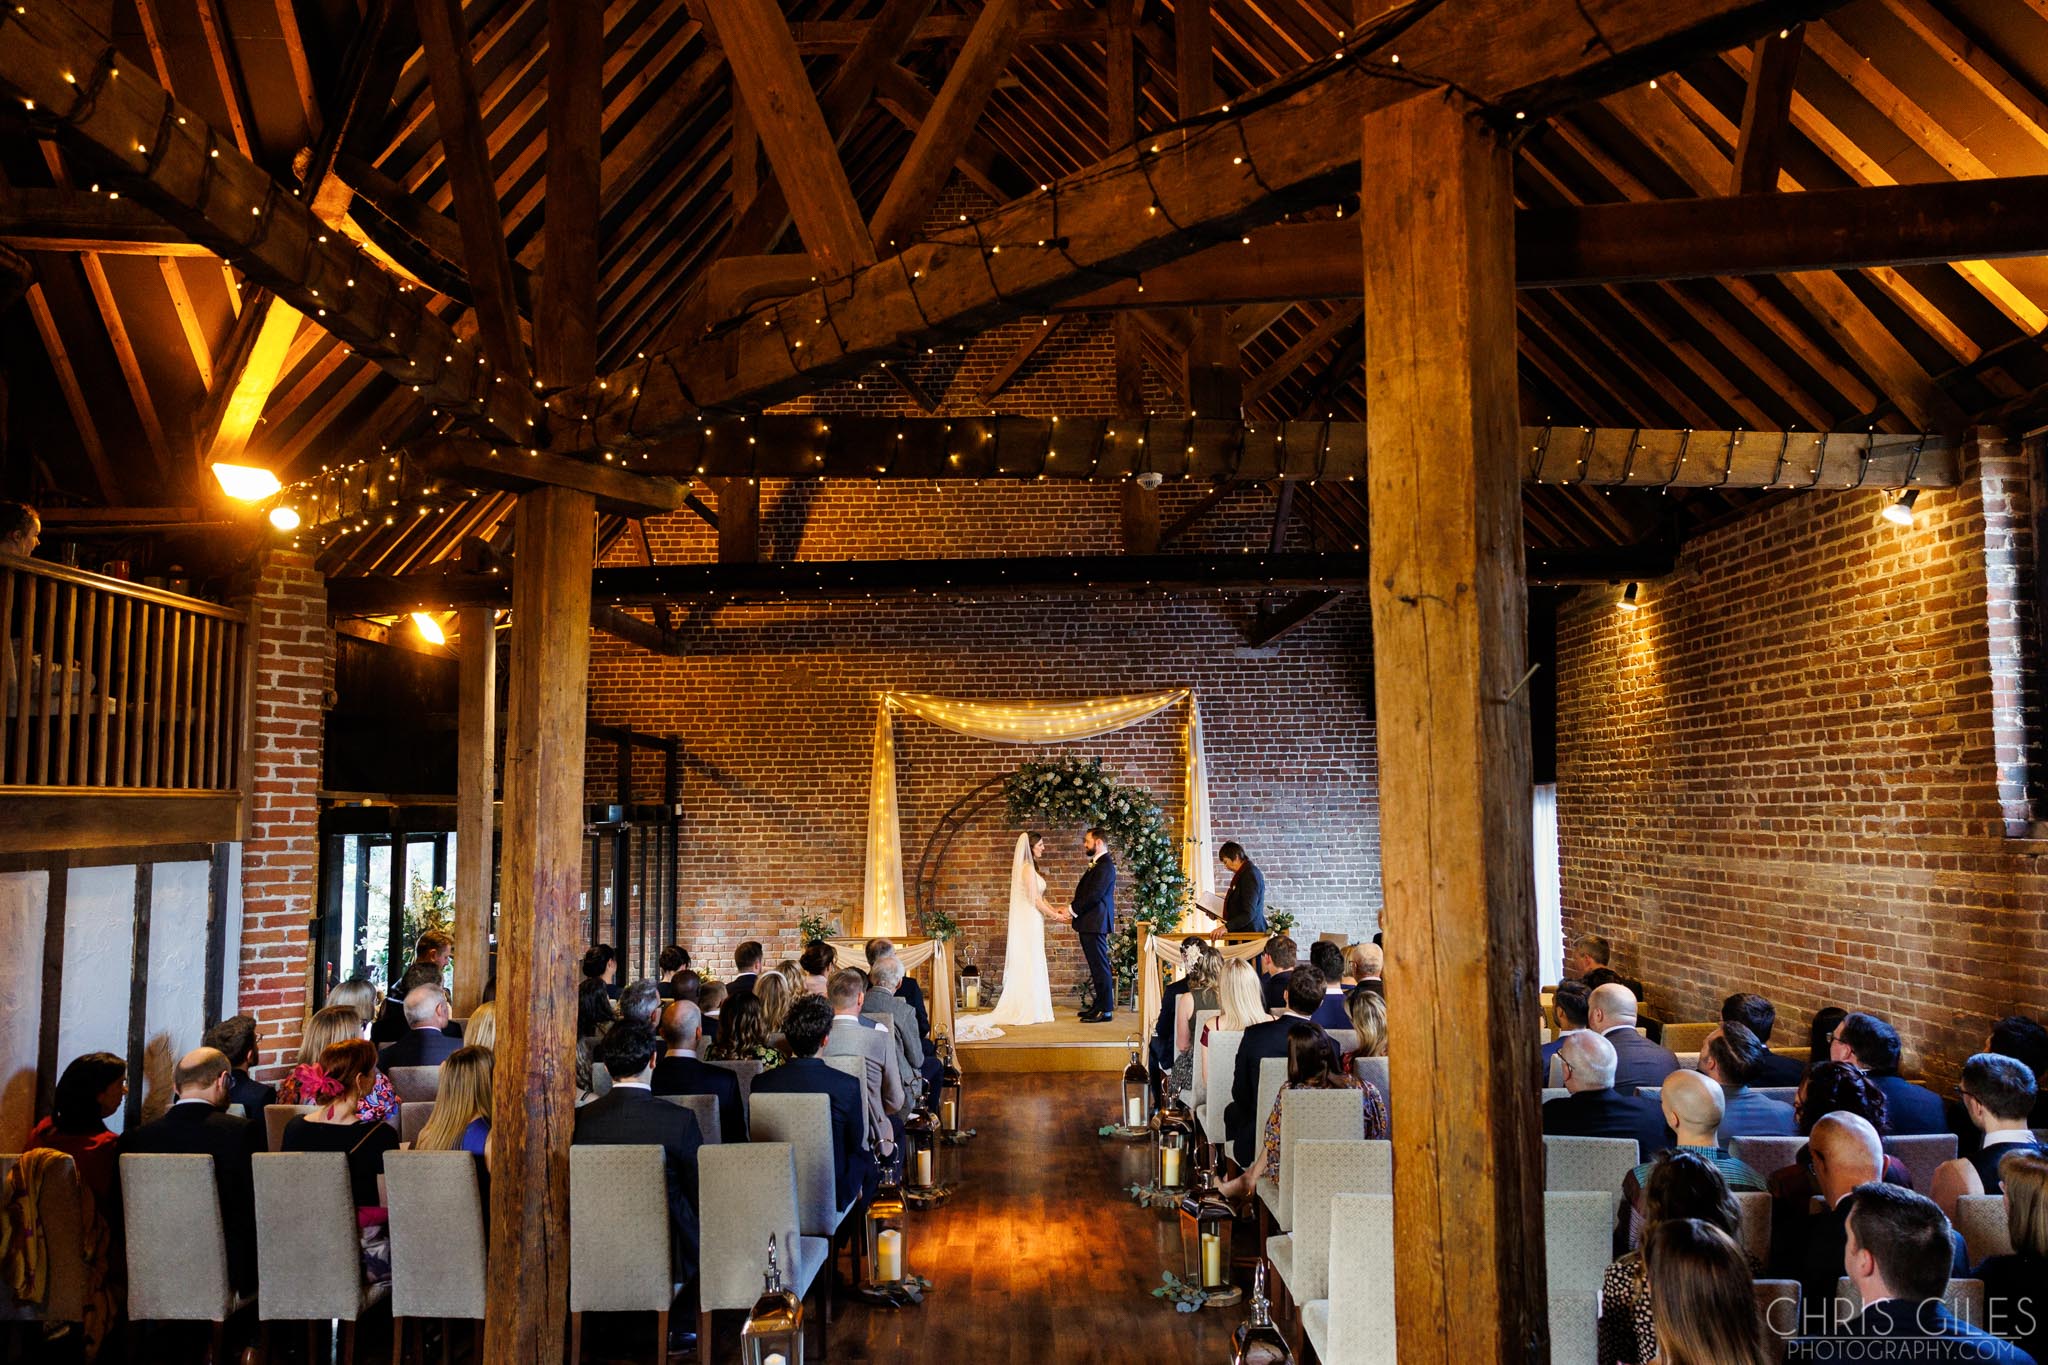 The Wedding Ceremony Room at Cooling Castle Barn